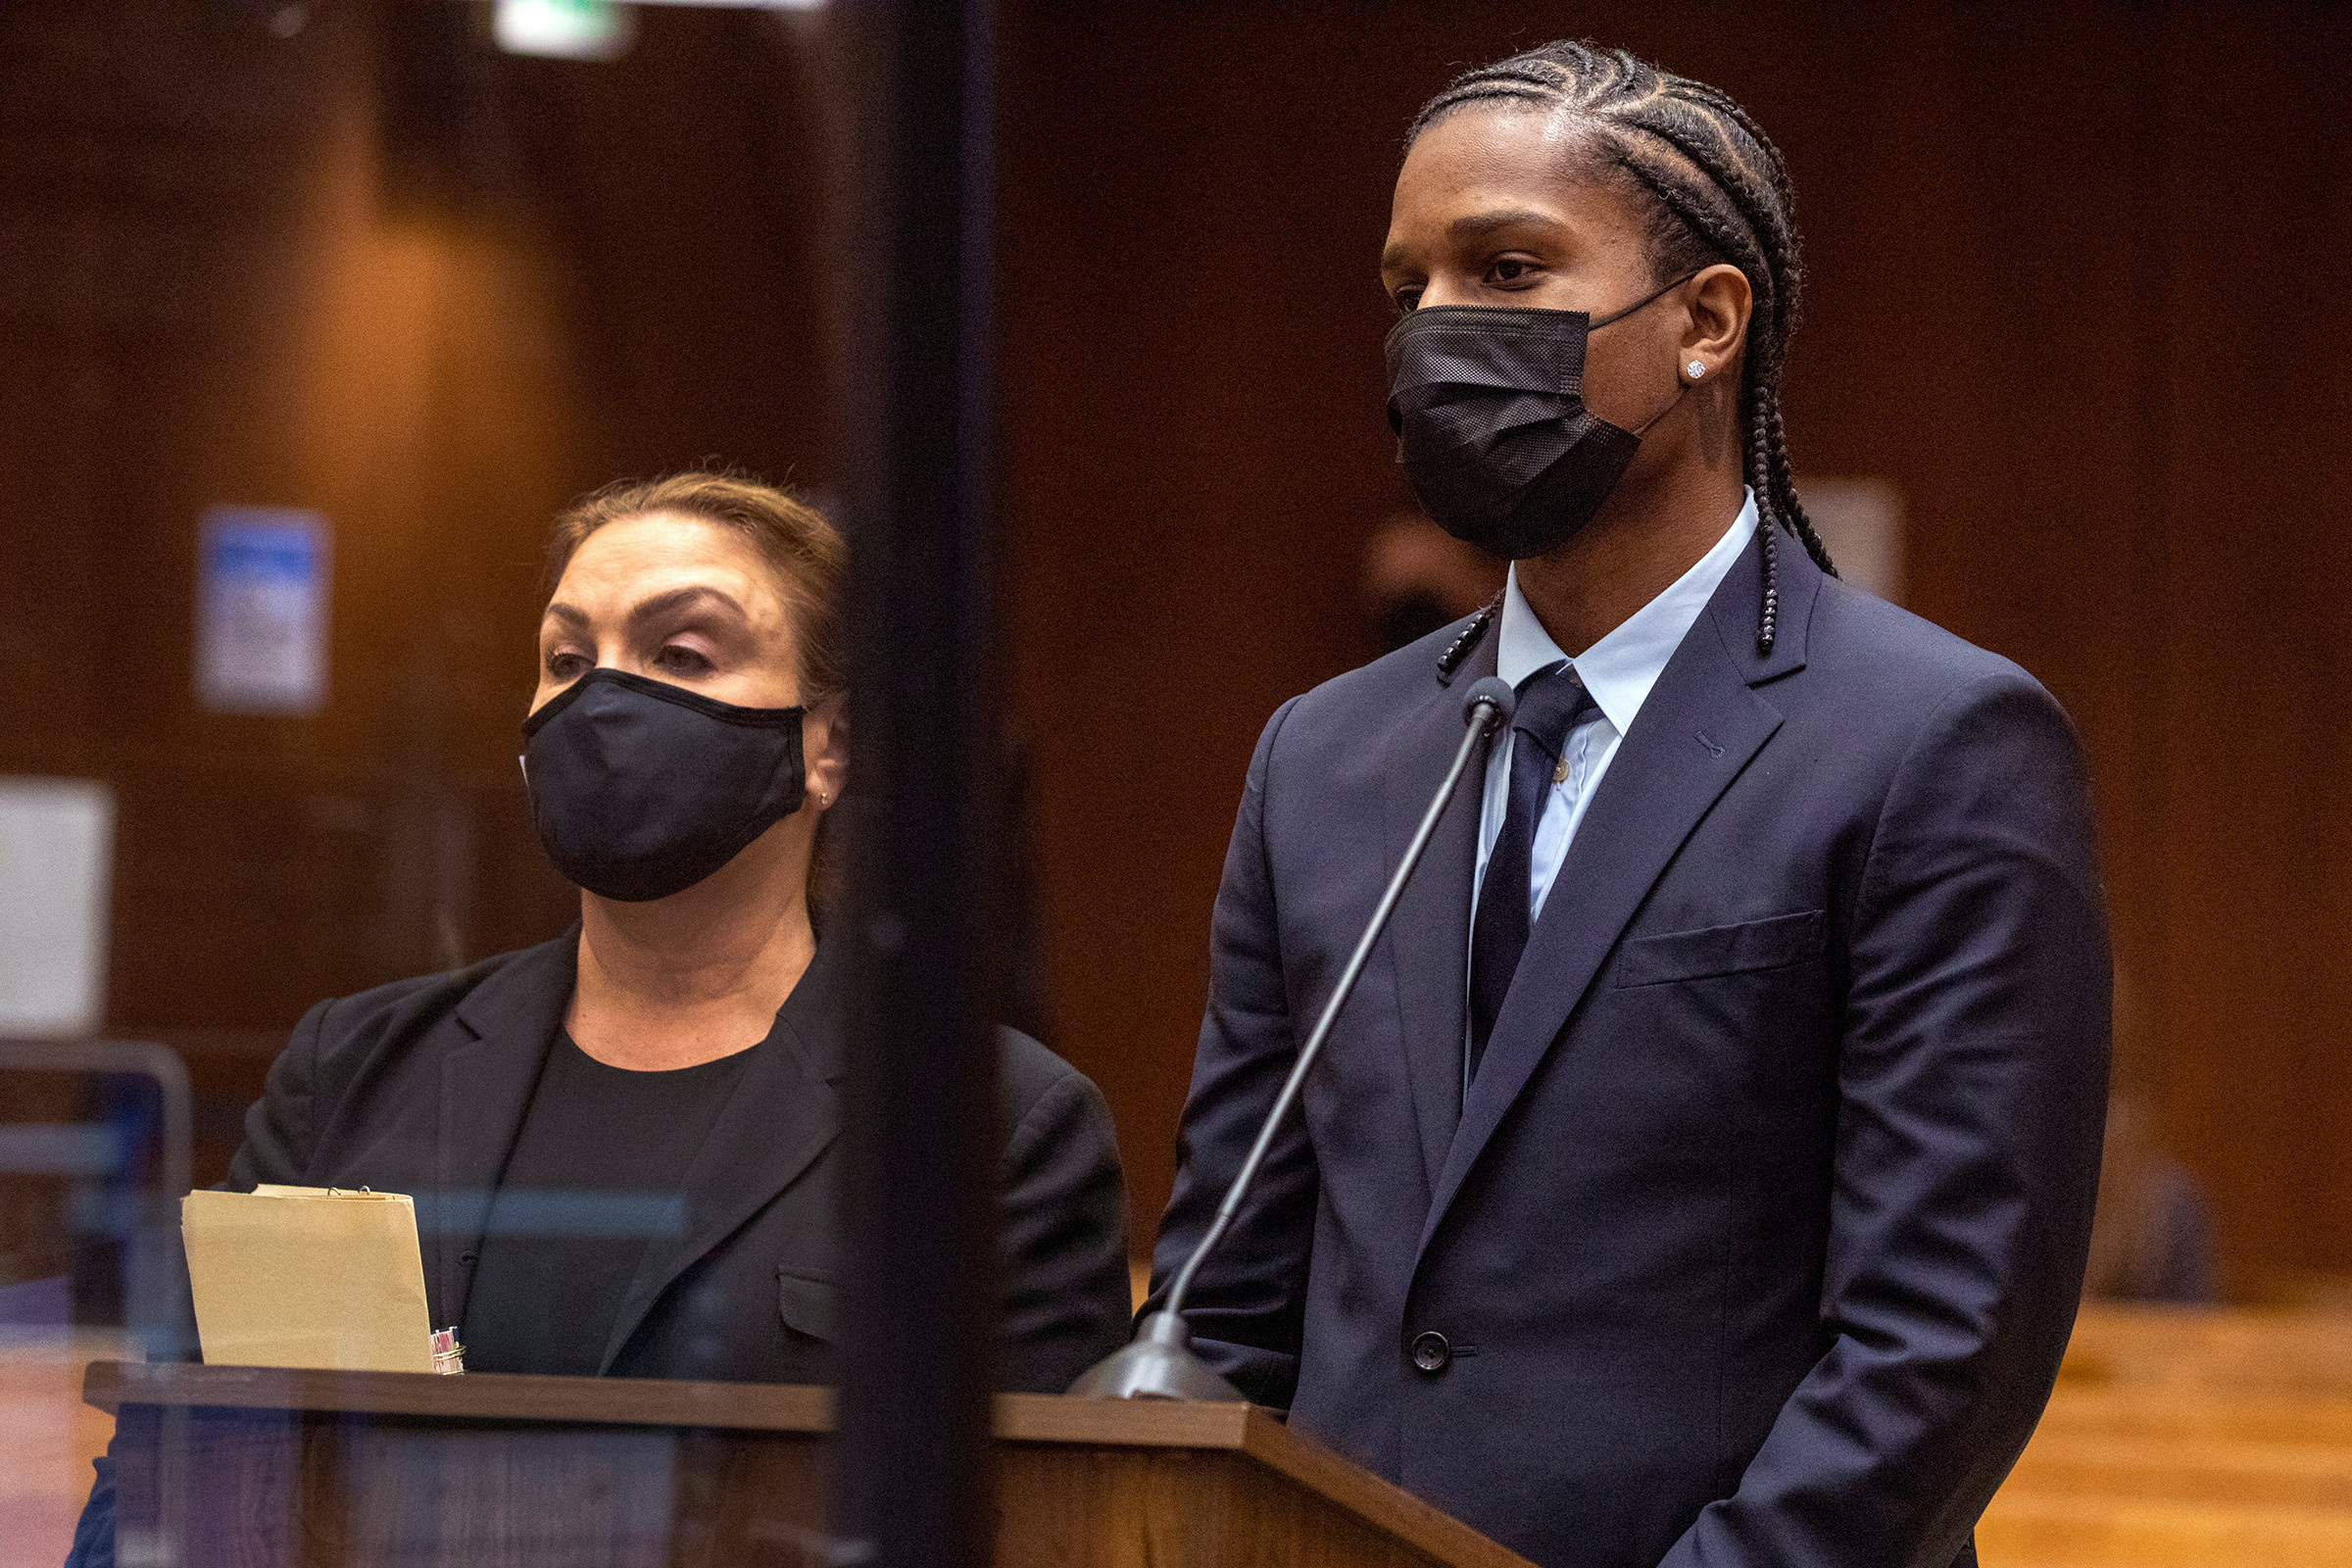 Rakim Mayers, the rapper known as A$AP Rocky at his arraignment in Los Angeles